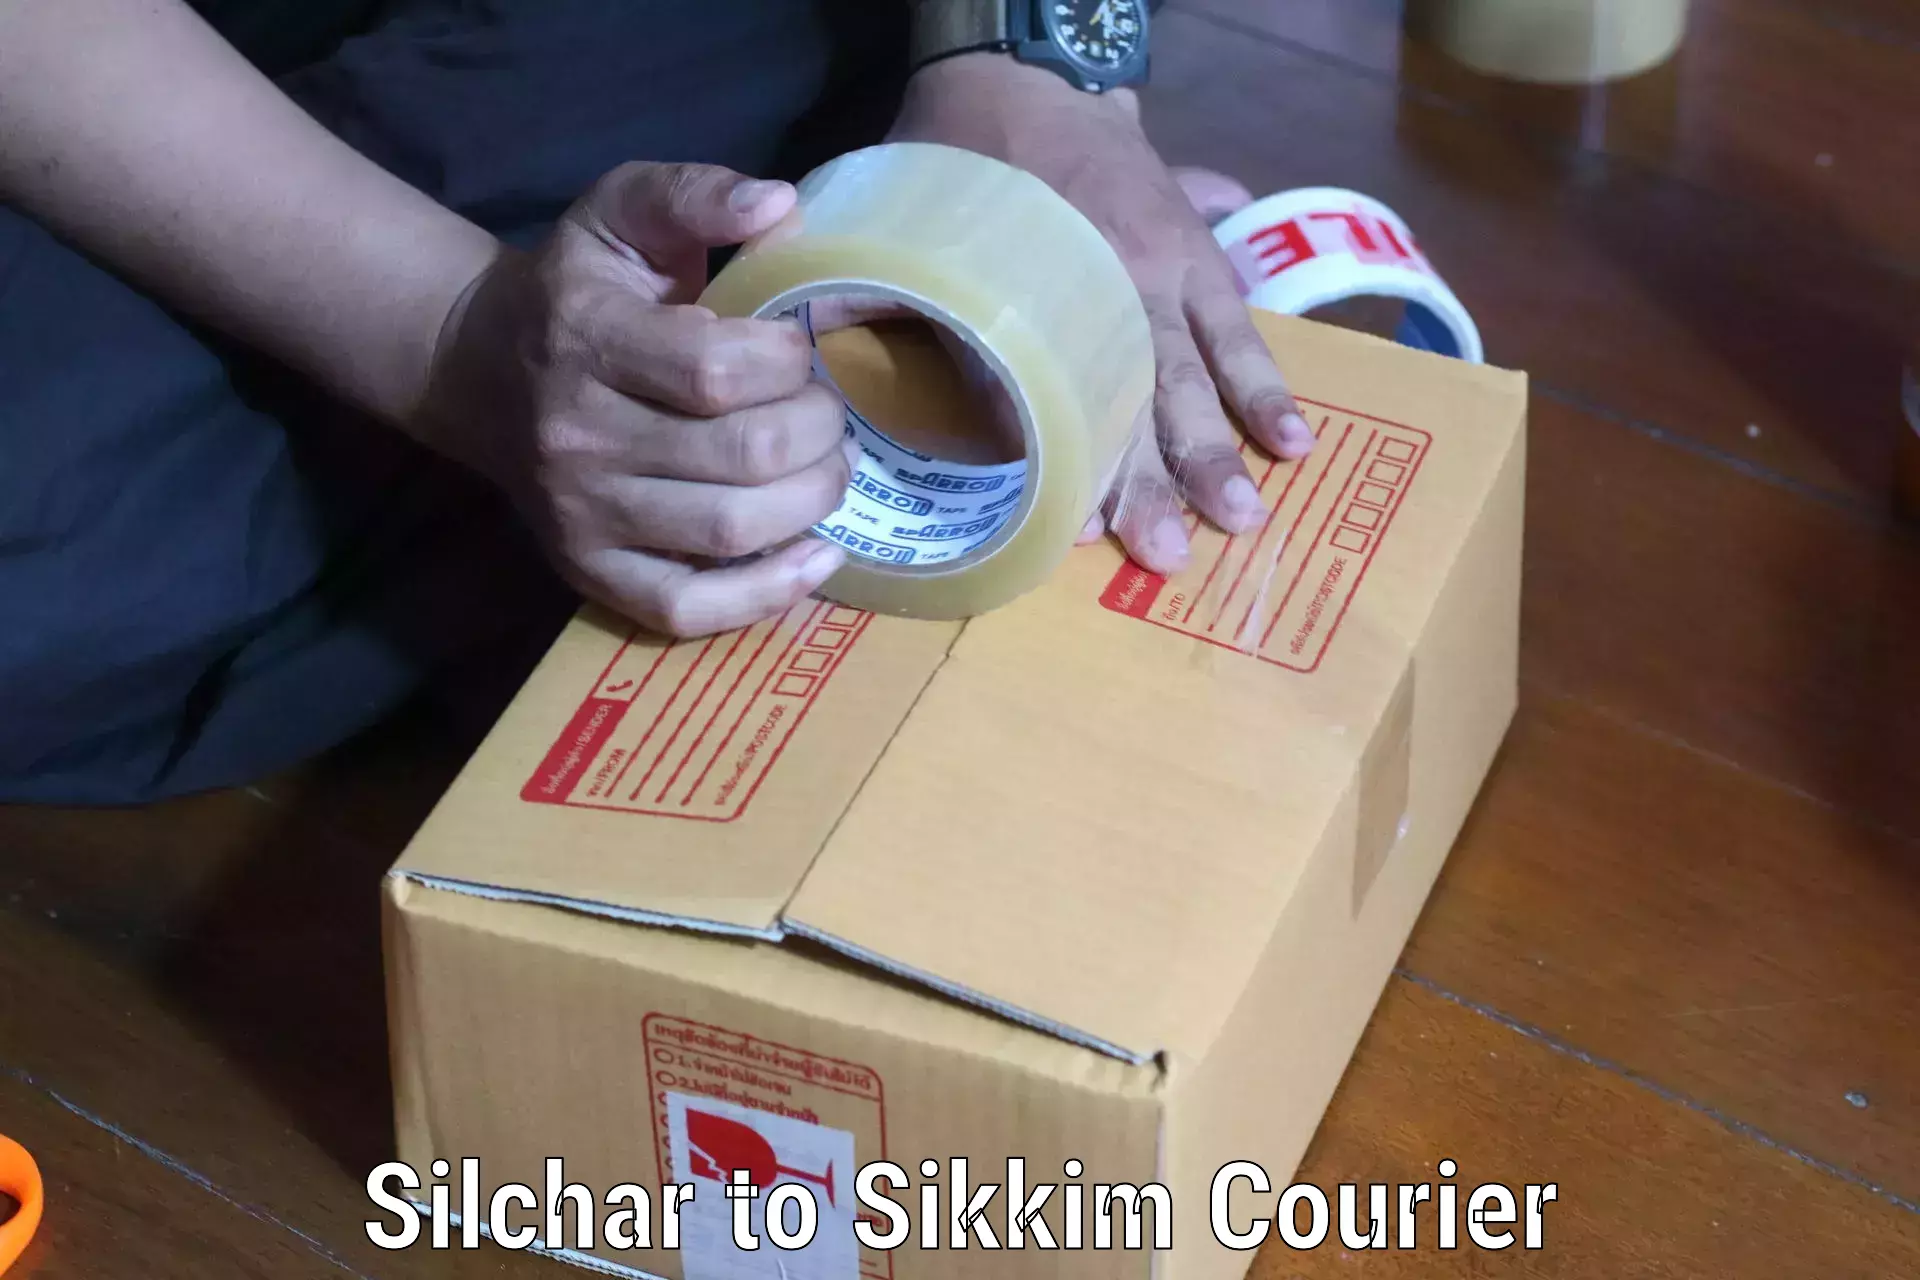 Local courier options Silchar to Gangtok